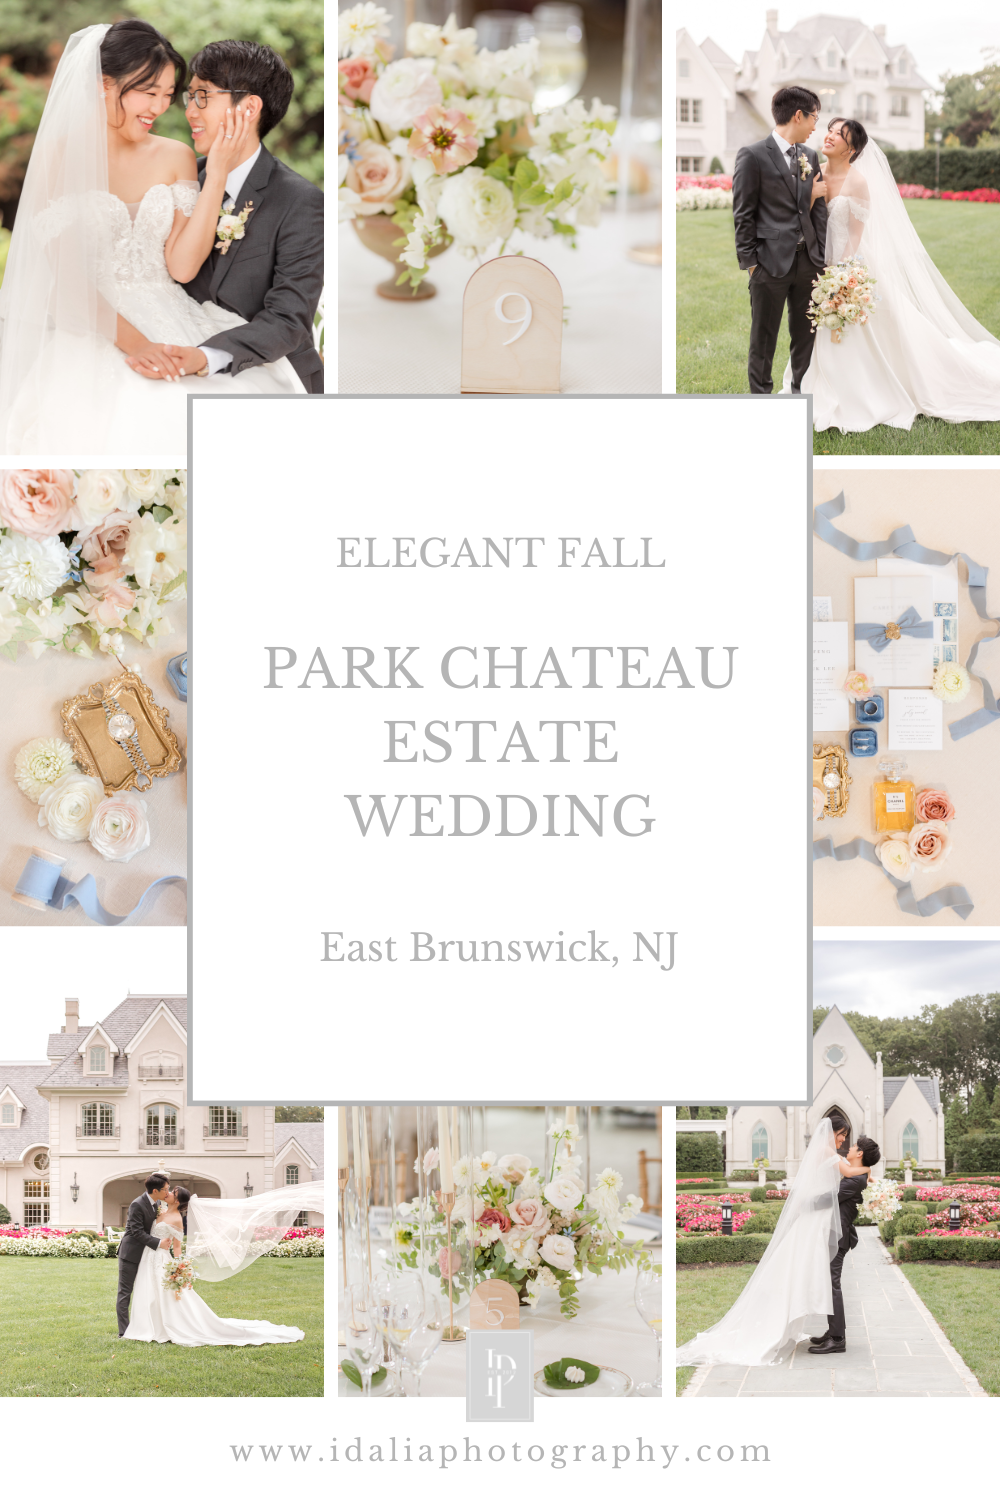 Fall Park Chateau Estate Wedding with elegant Chinese and Korean details photographed by NJ wedding photographer Idalia Photography